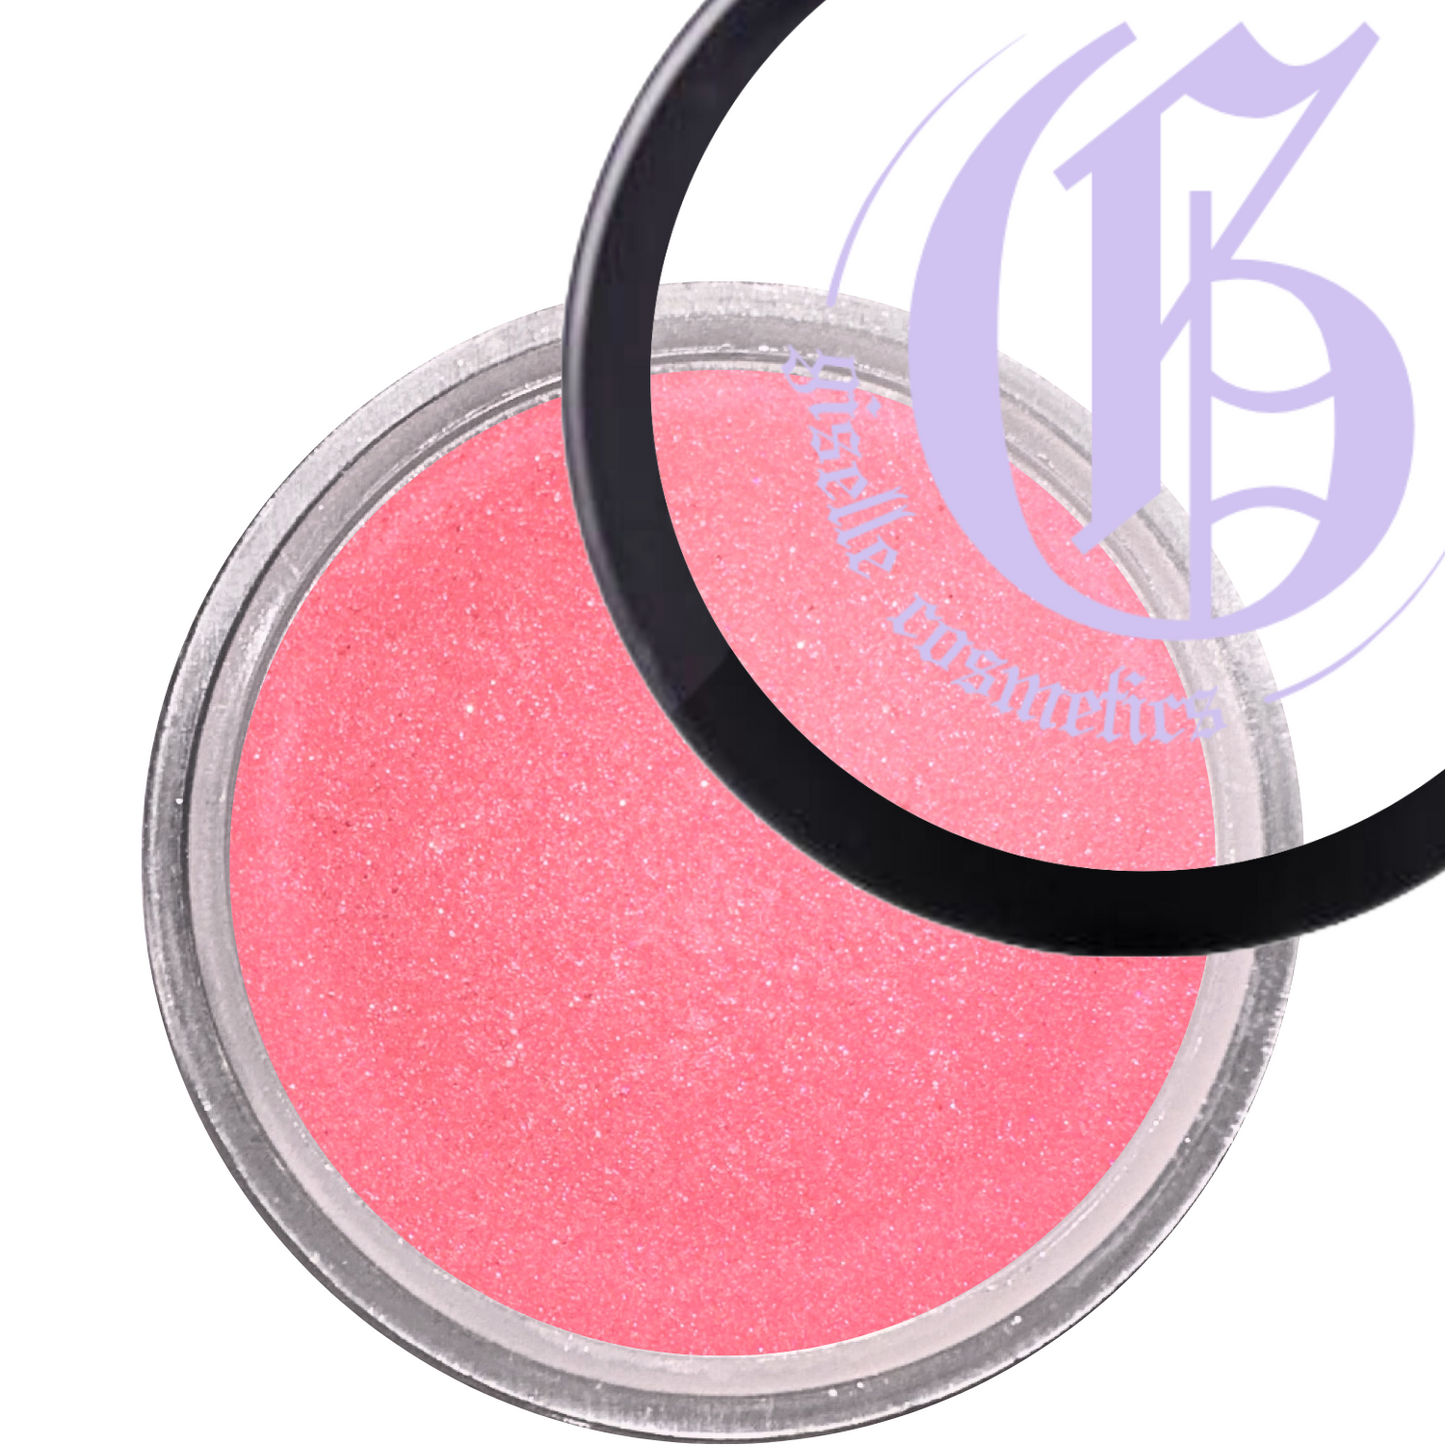 Giselle Doll Loose Powder Mineral Blush